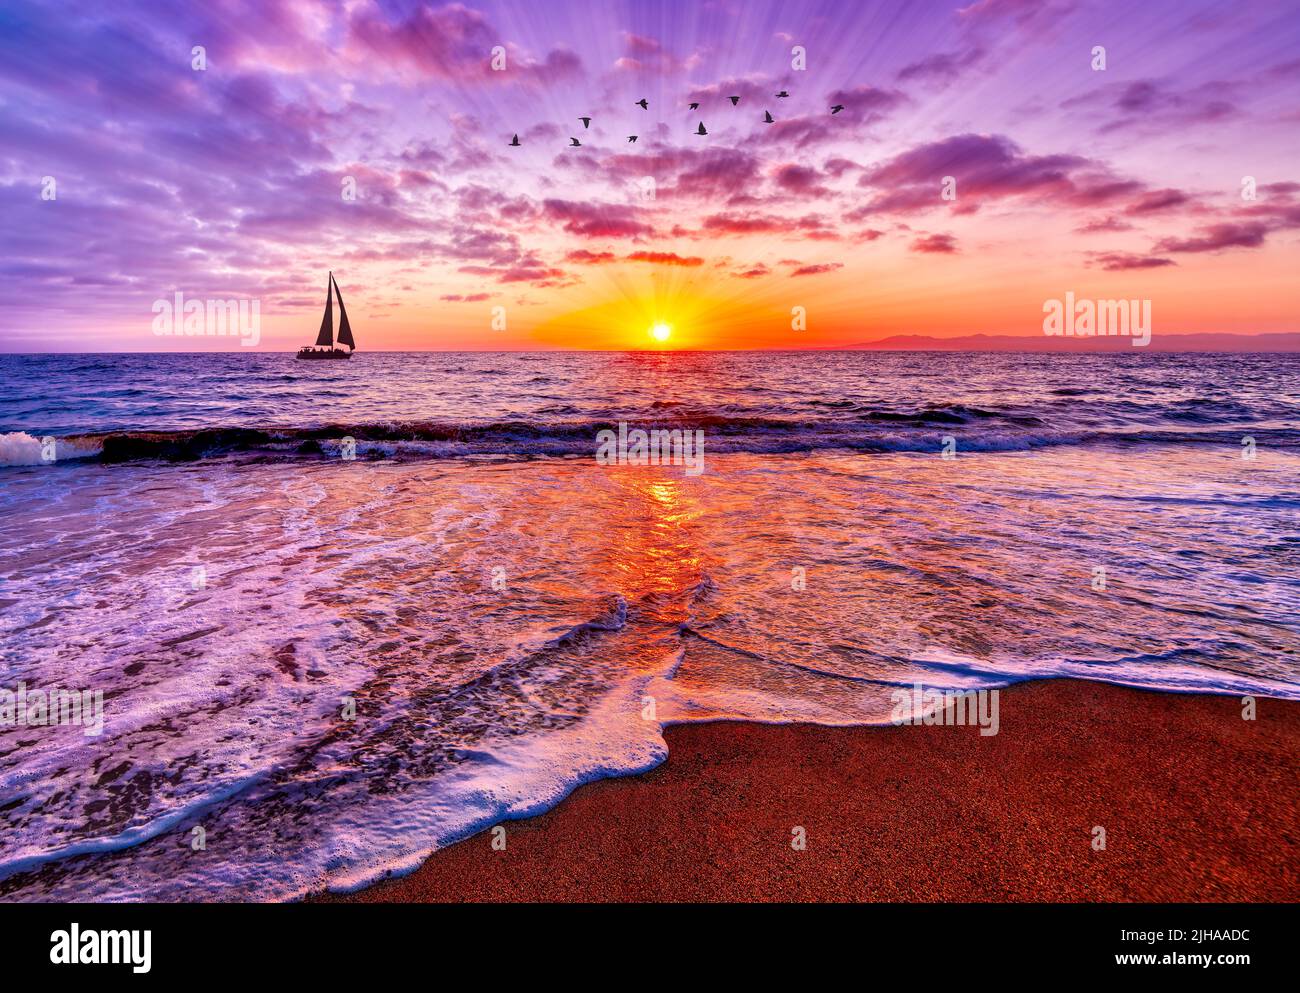 Sun Rays Are Bursting On The Ocean Horizon Sunrise With A Sailboat Sailing And Birds Flying Overhead Stock Photo